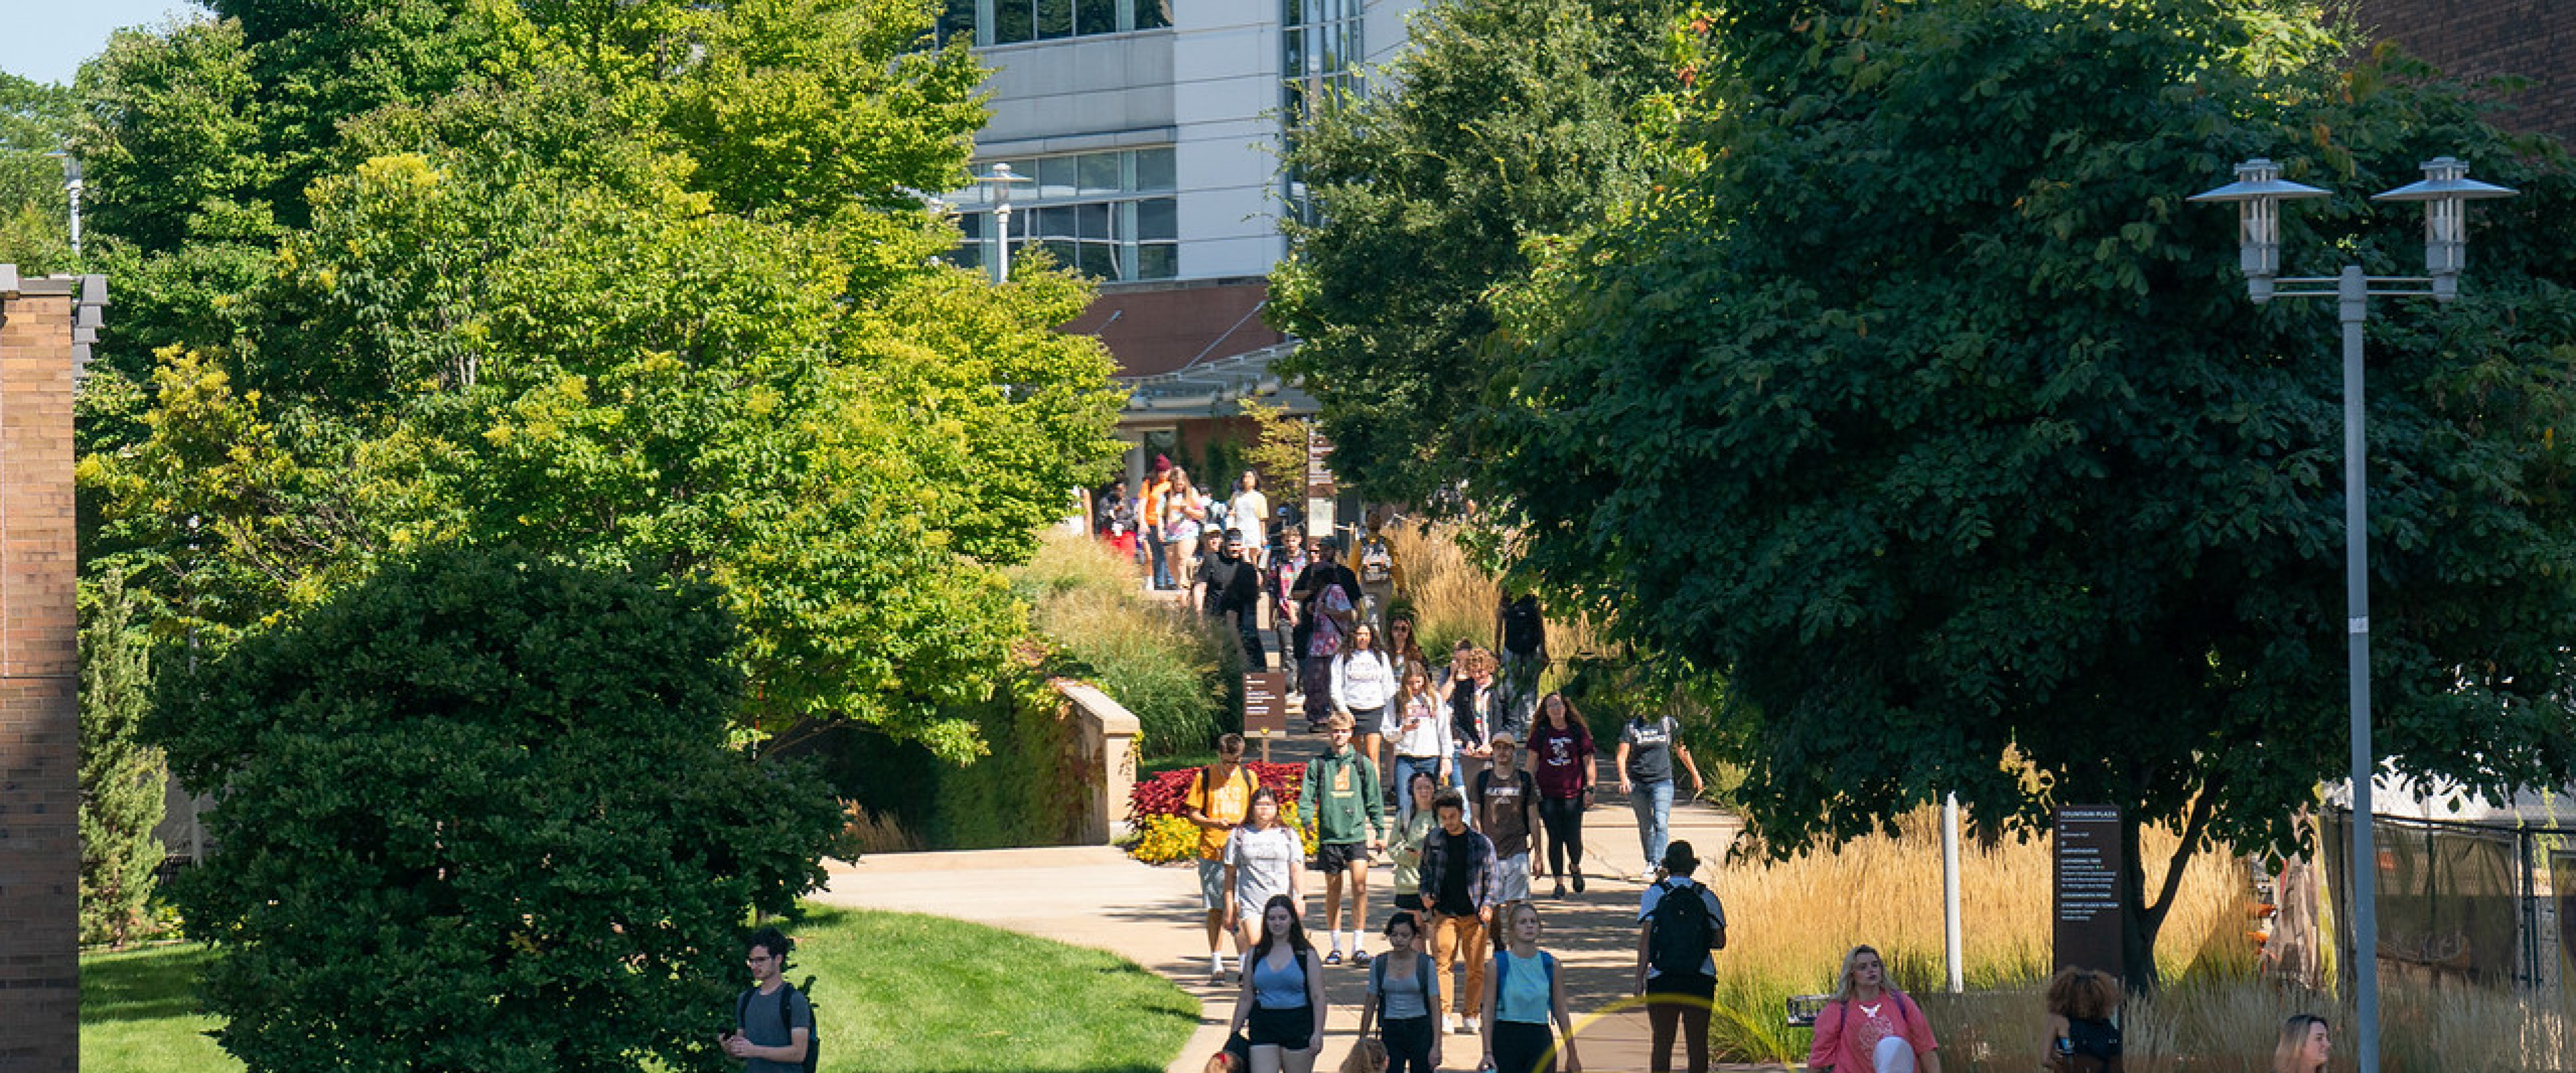 Students walking outside on WMU's campus